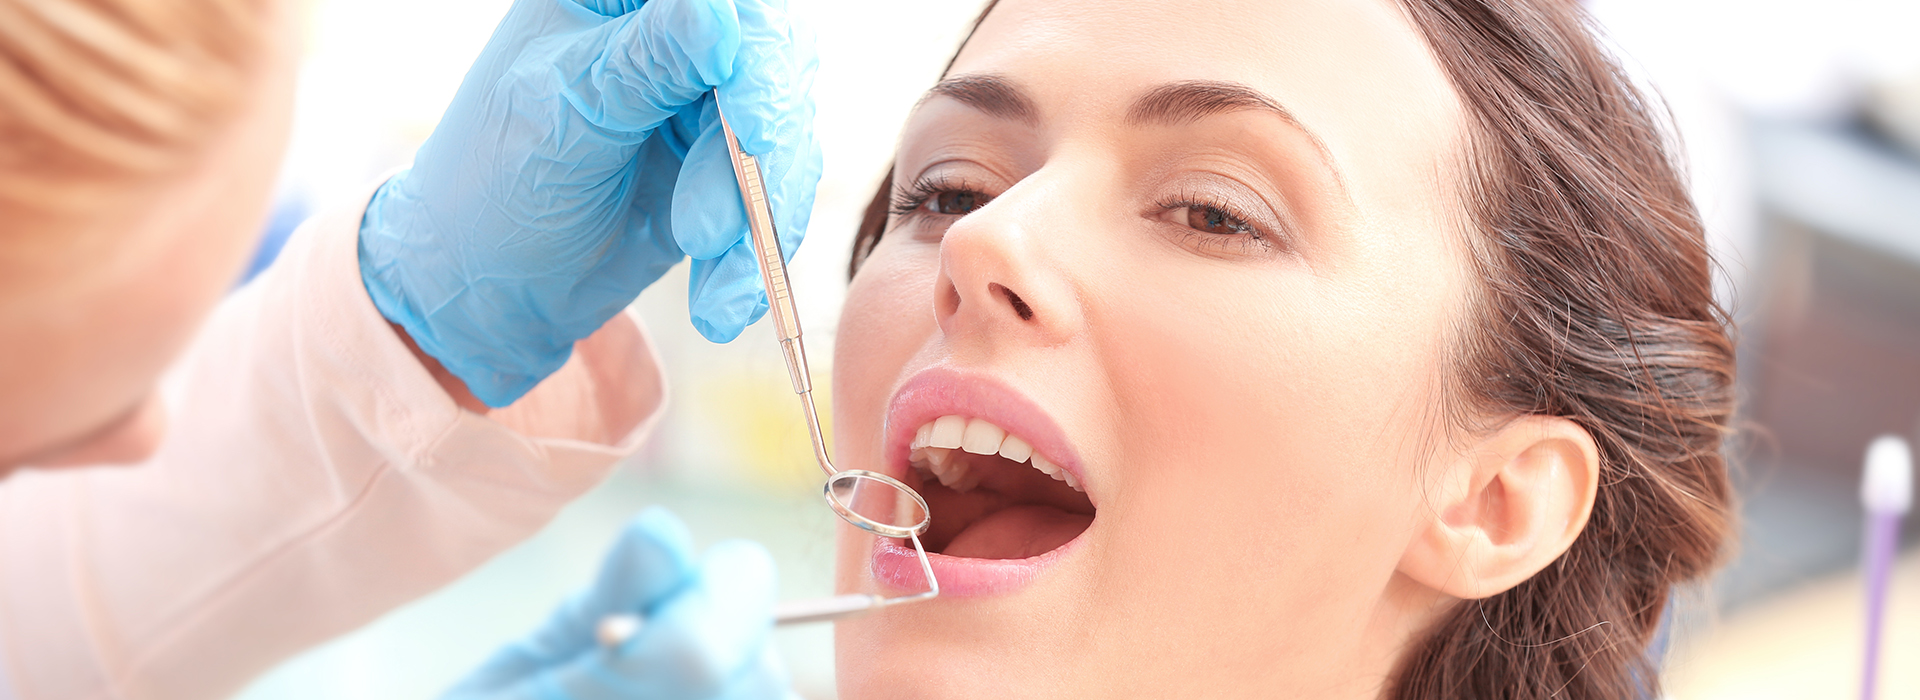 Modern Dental Care of Queens | Dental Fillings, Cosmetic Dentistry and Periodontal Treatment